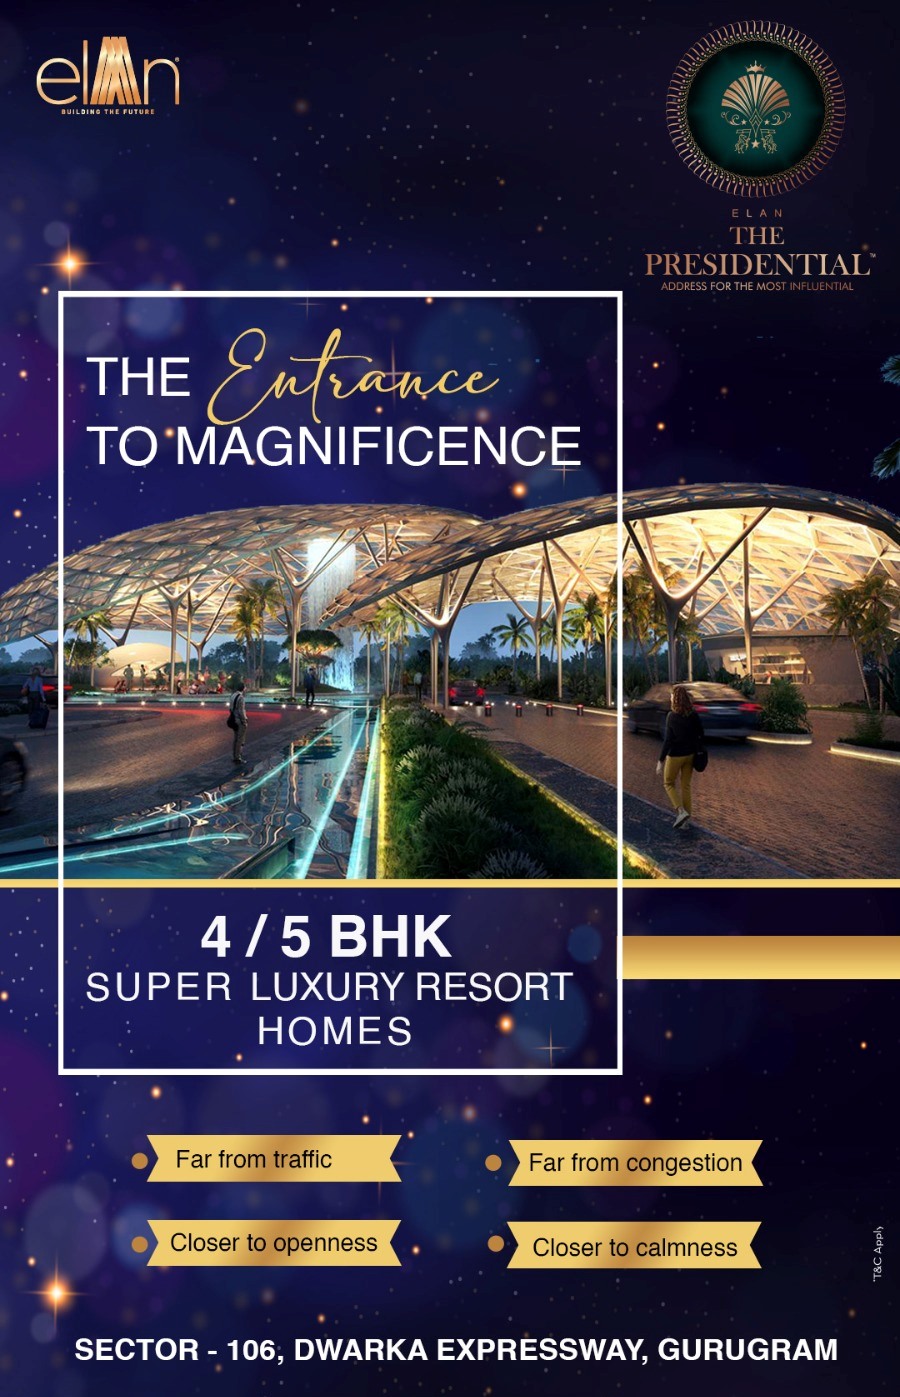 In the history of residential at Elan The Presidential in Dwarka Expressway, Gurgaon